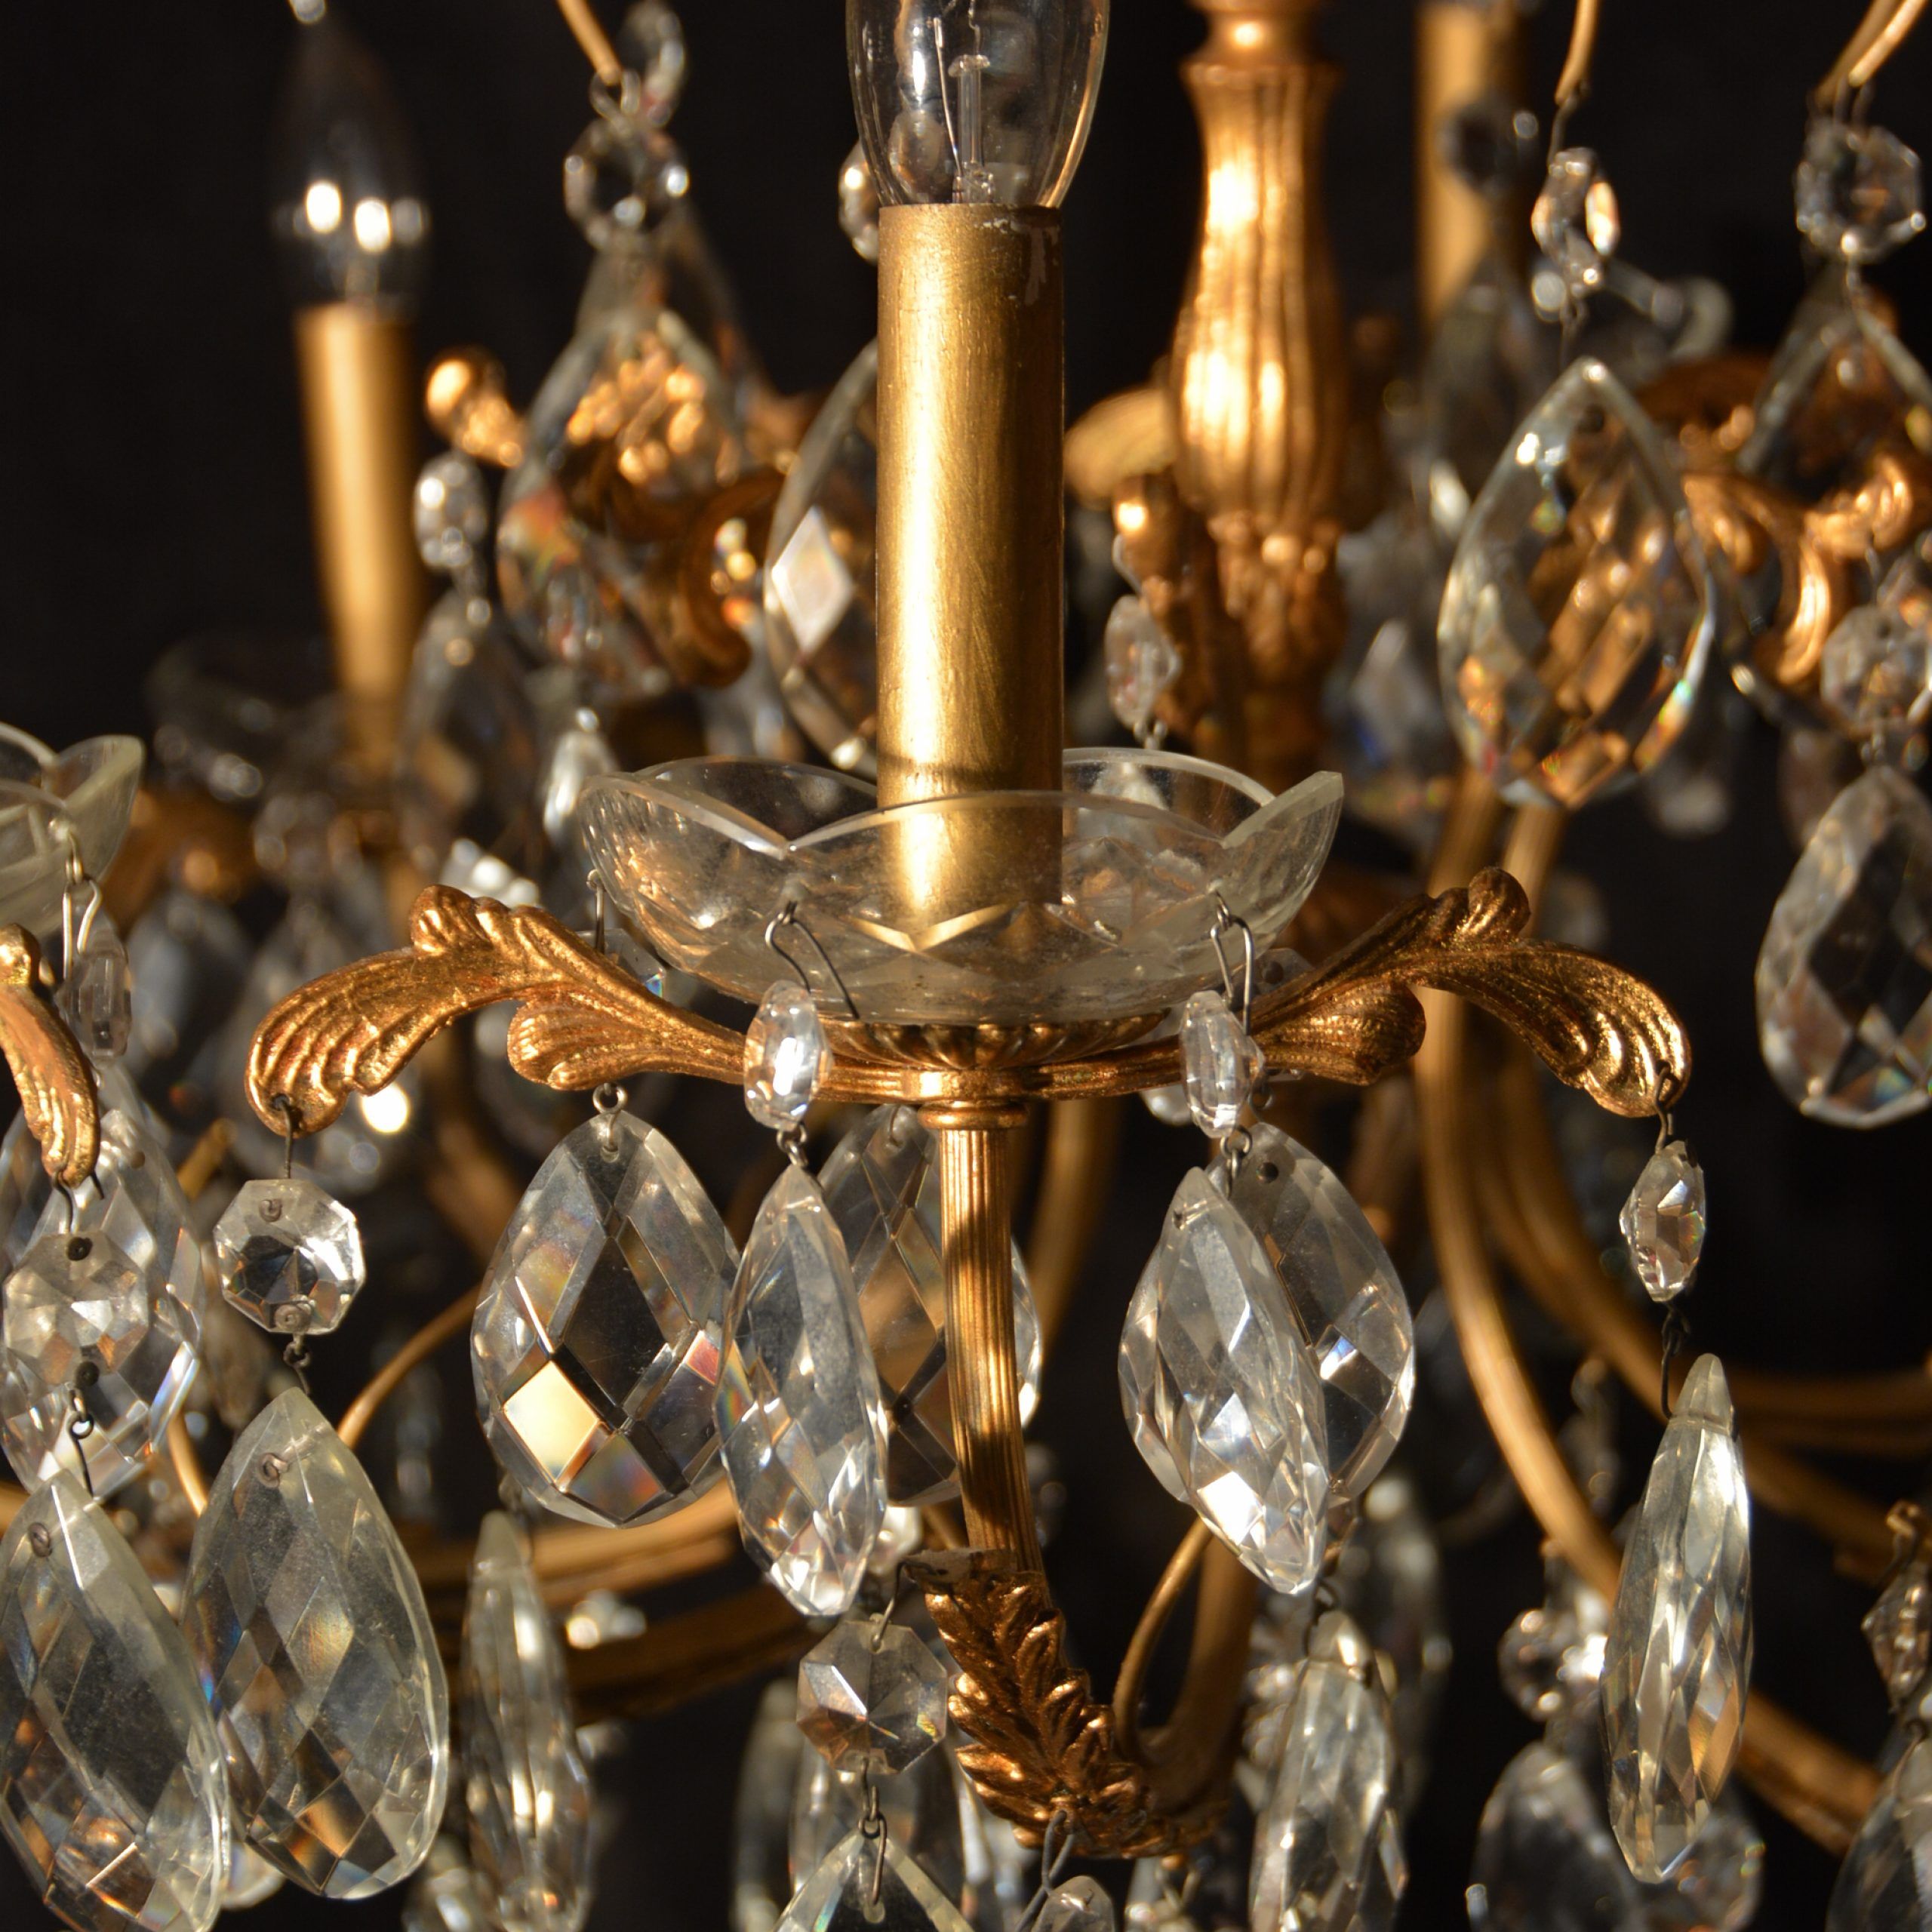 8 Light French Gold Bronze Crystal Chandelier For Sale With Most Recent Antique Gild Two Light Chandeliers (View 8 of 15)